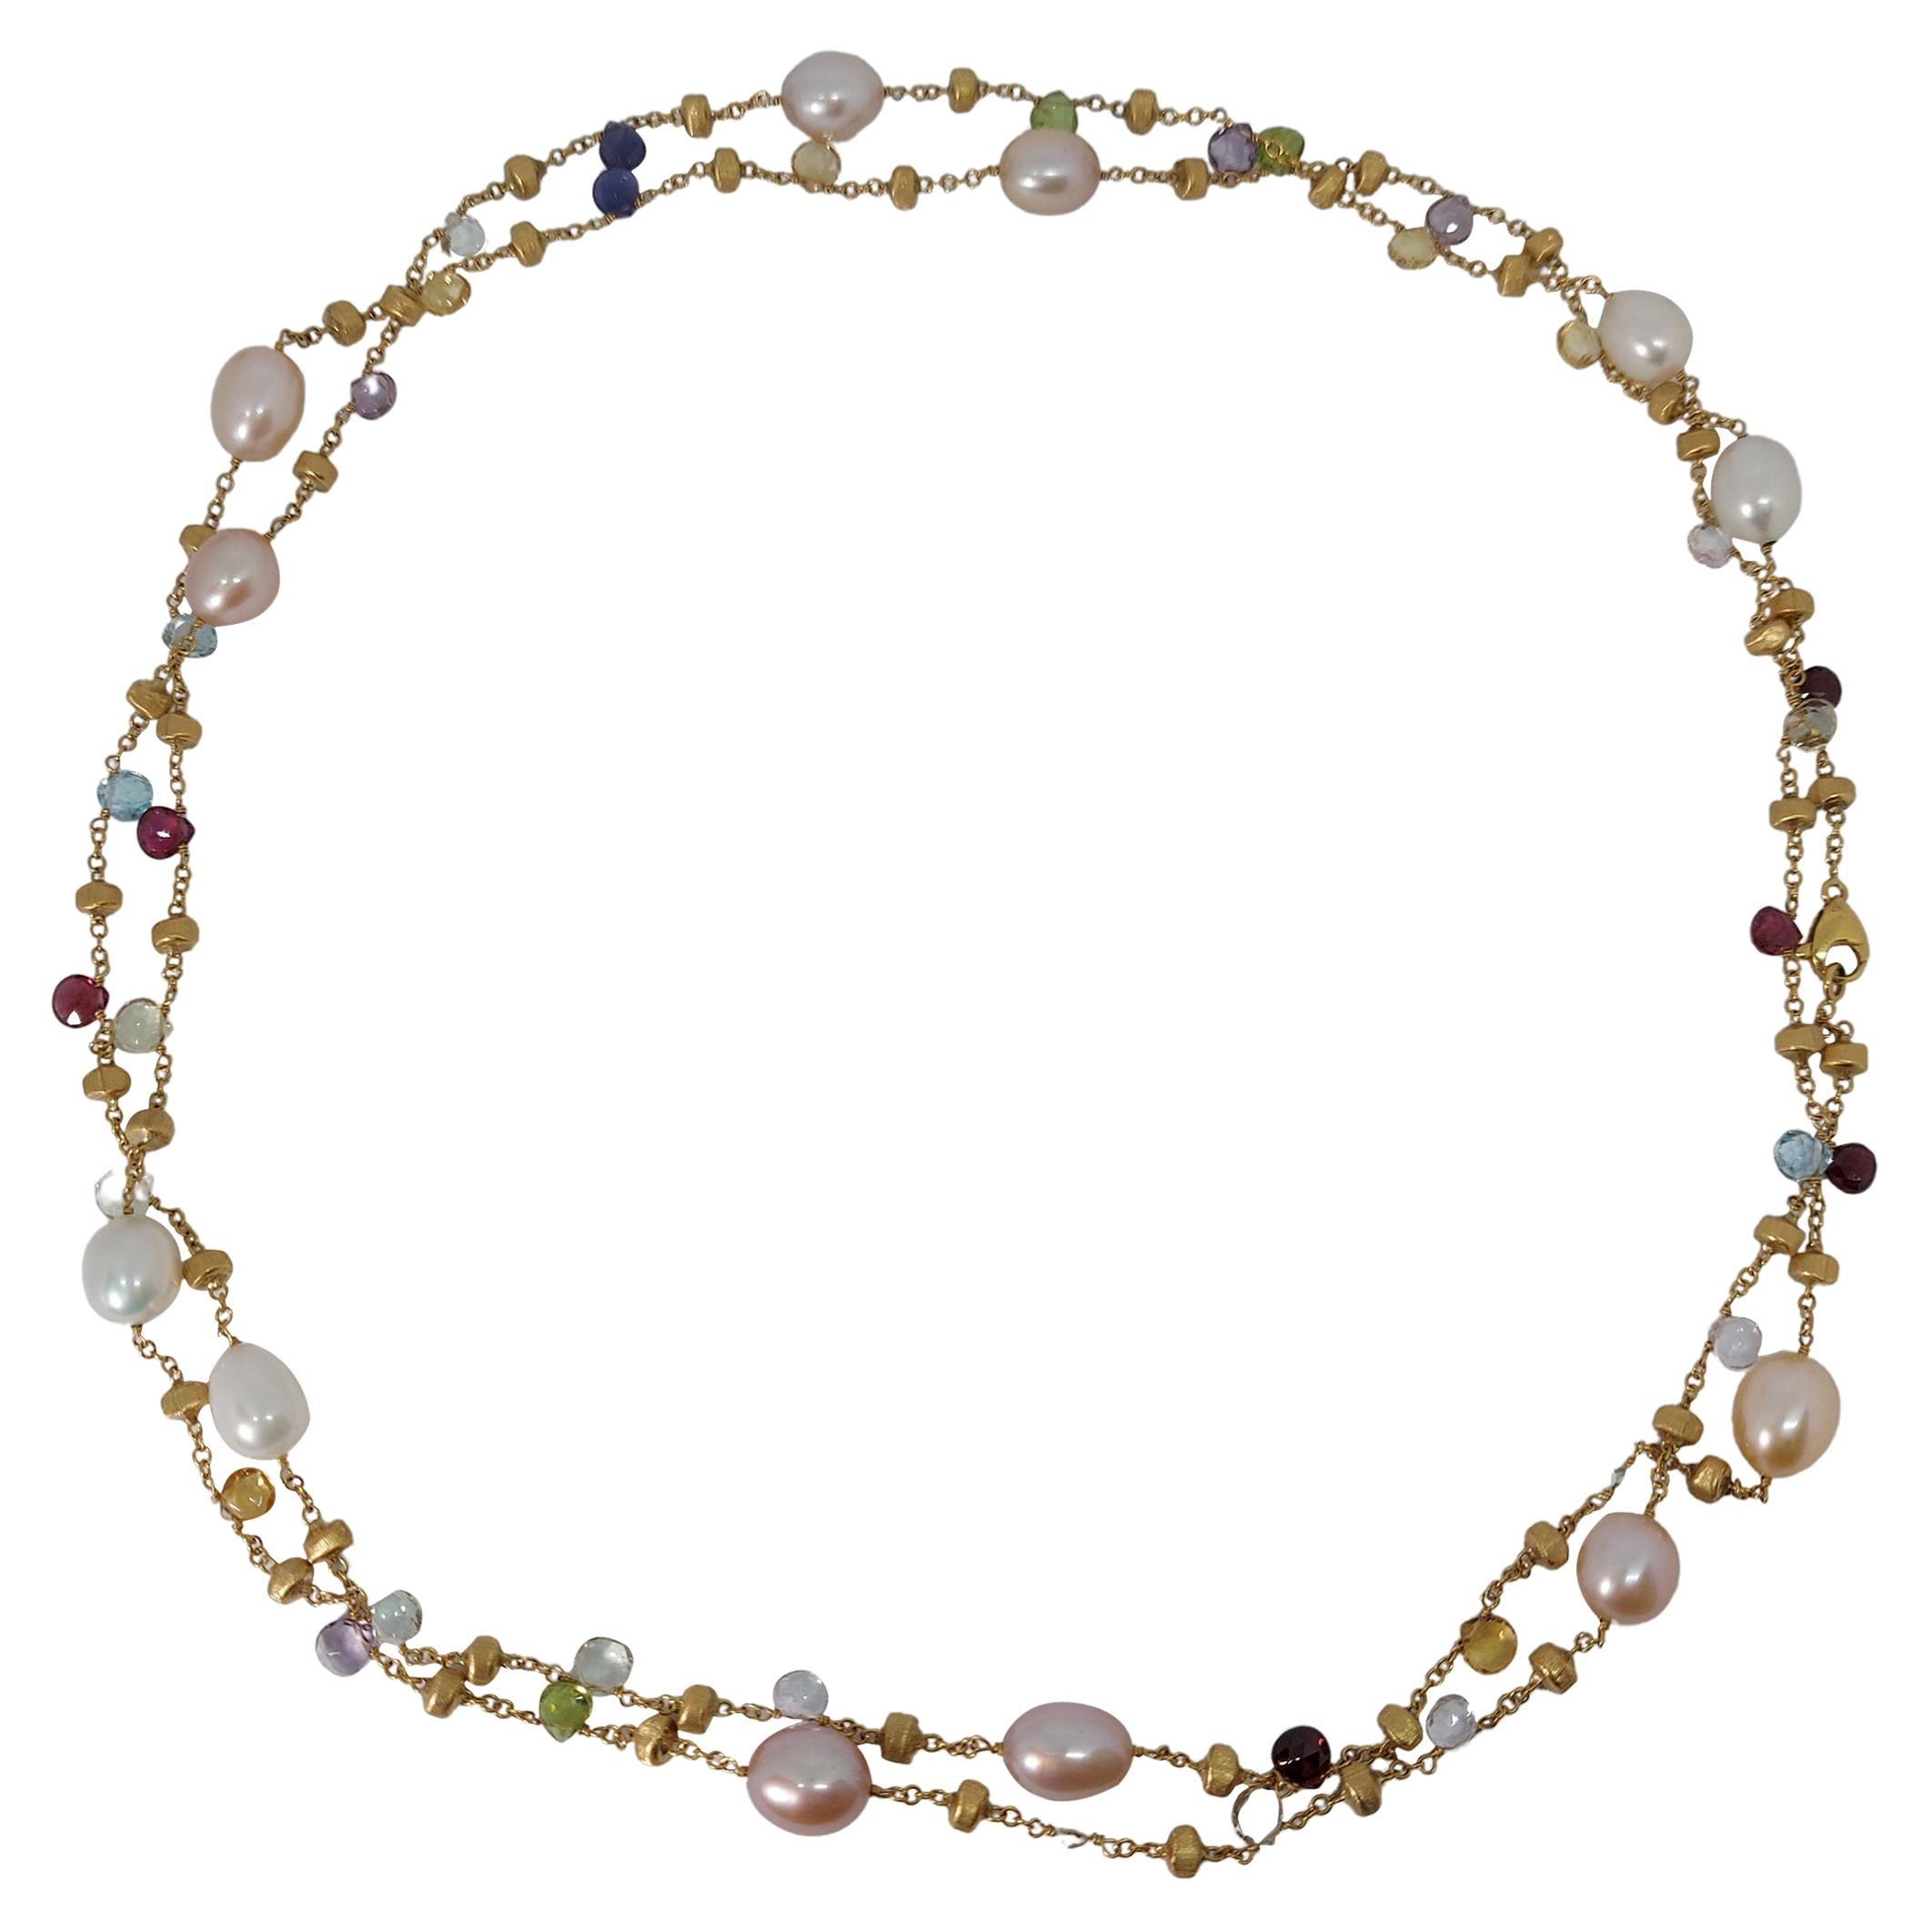 18kt Gold Marco Bicego Long Necklace, Paradise Collection, Pearls & Gemstones